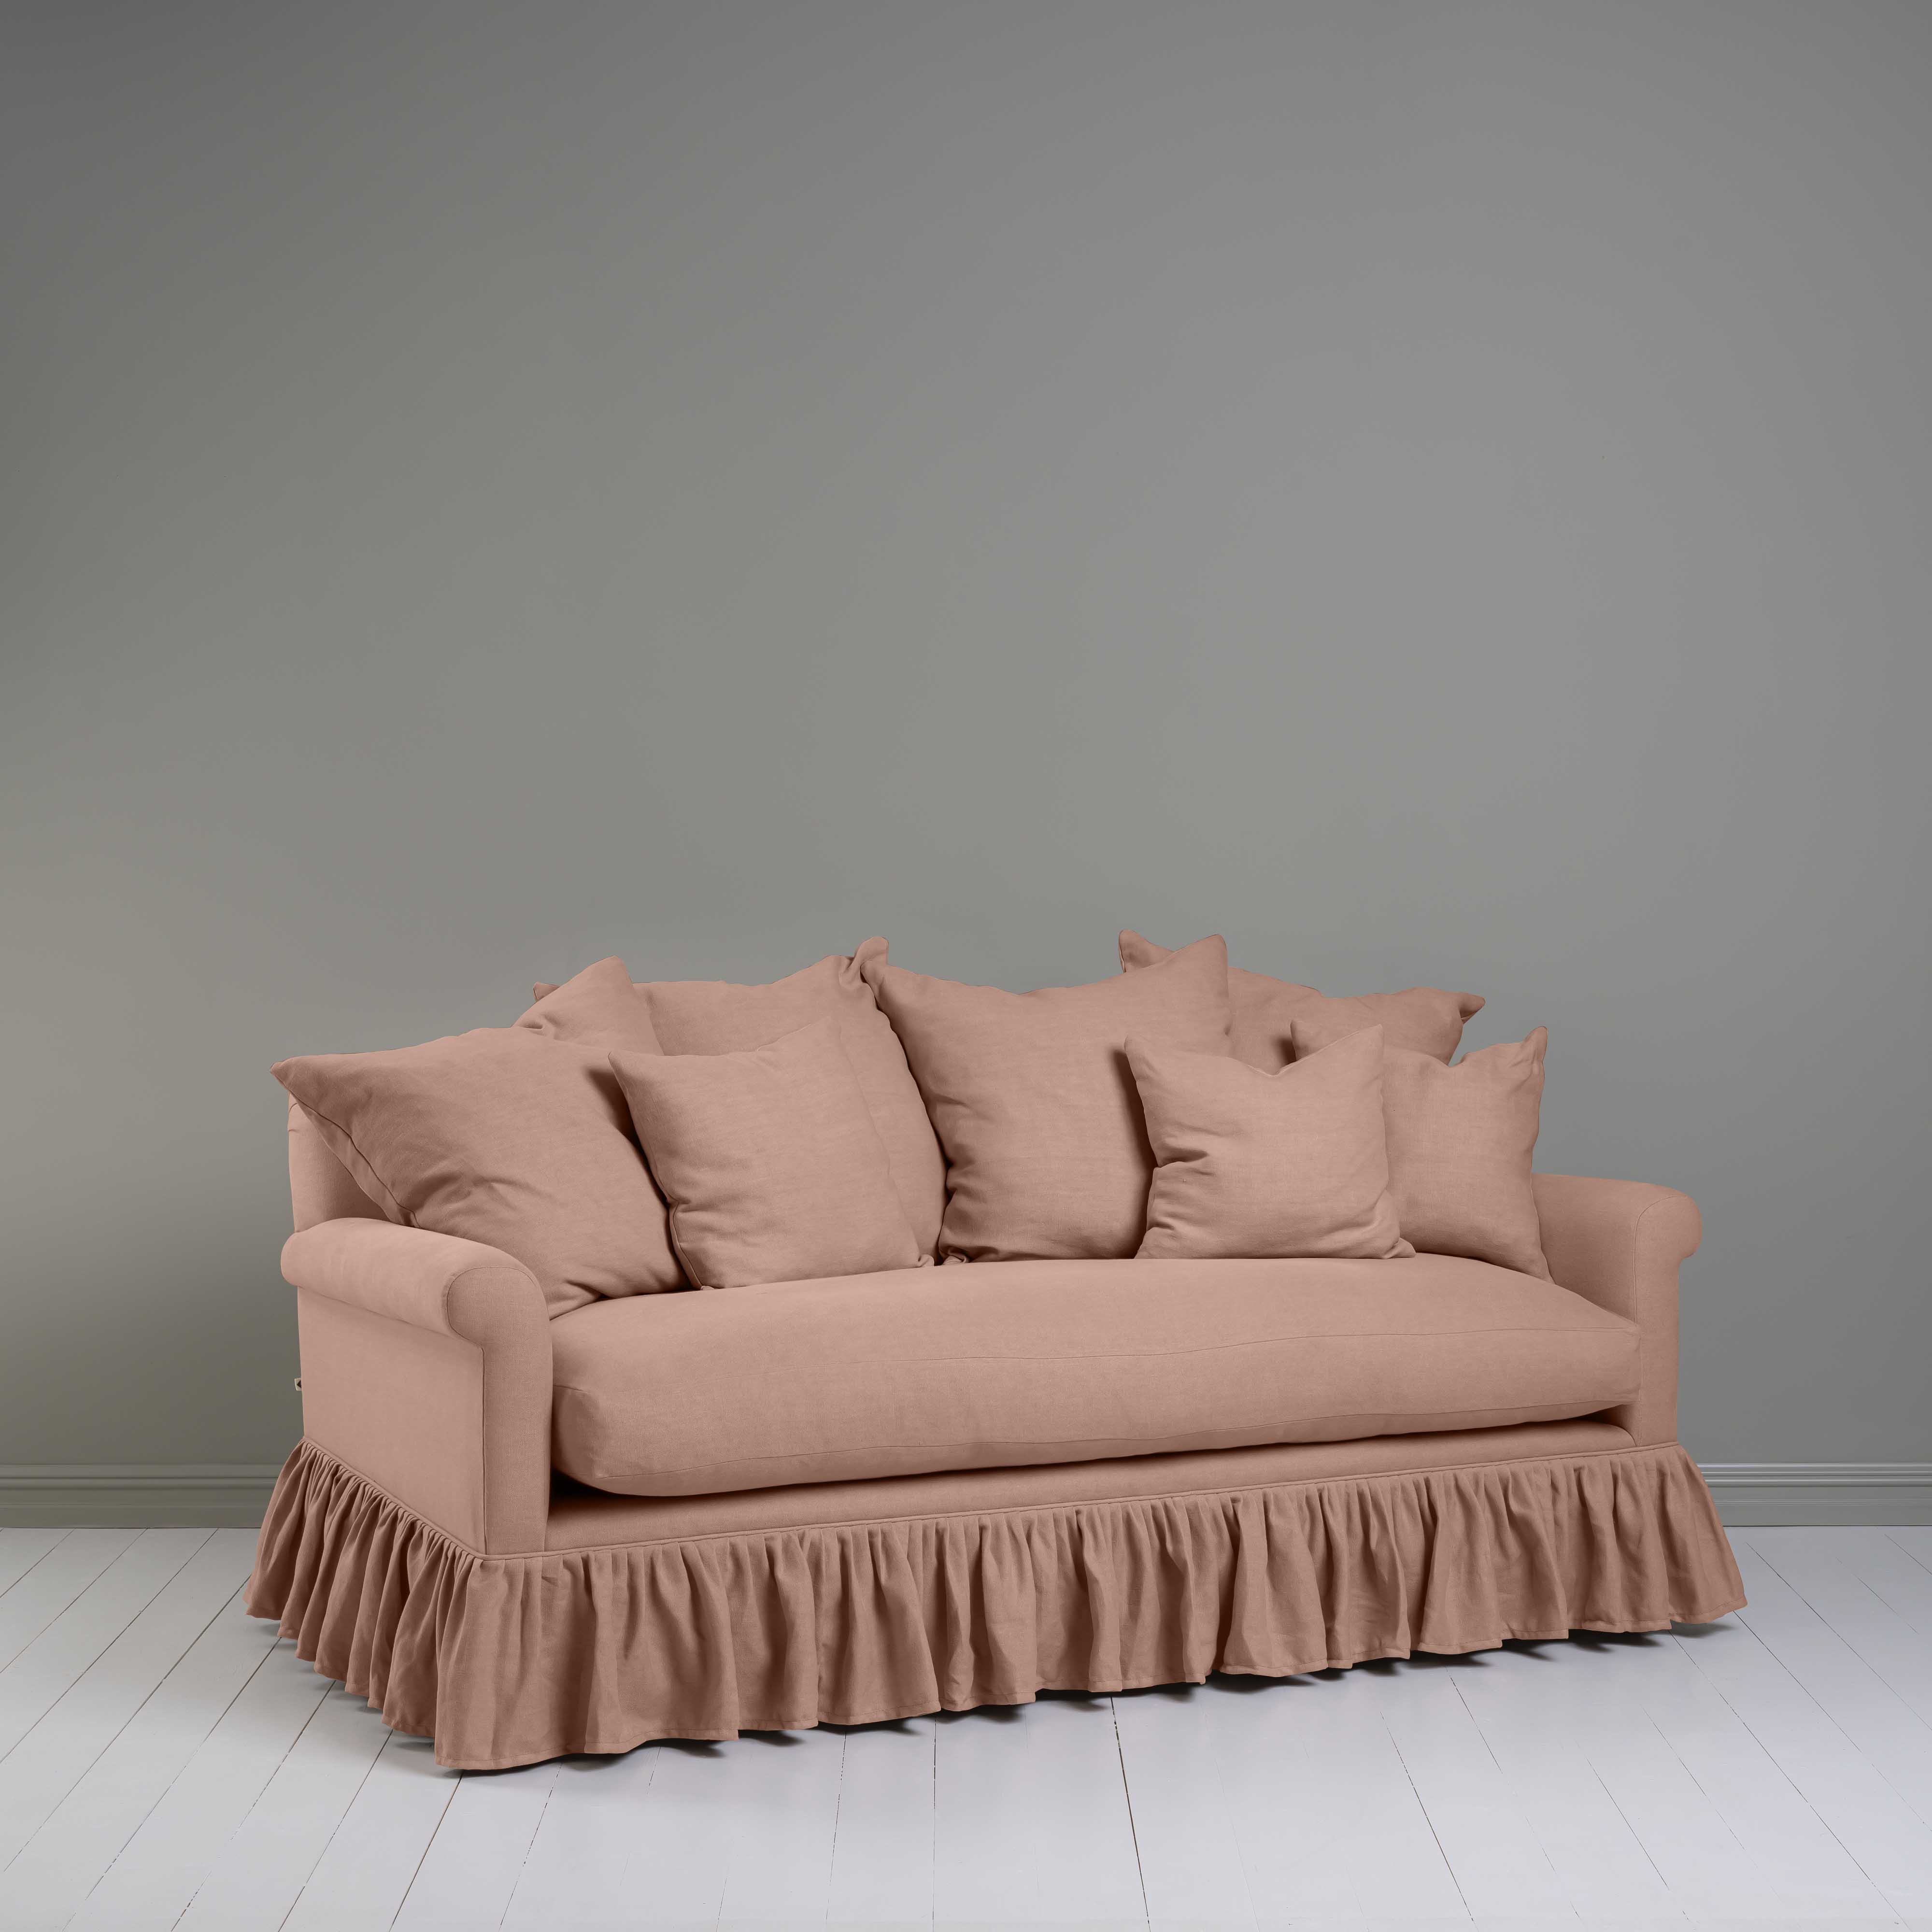  Curtain Call 3 Seater Sofa in Laidback Linen Roseberry 